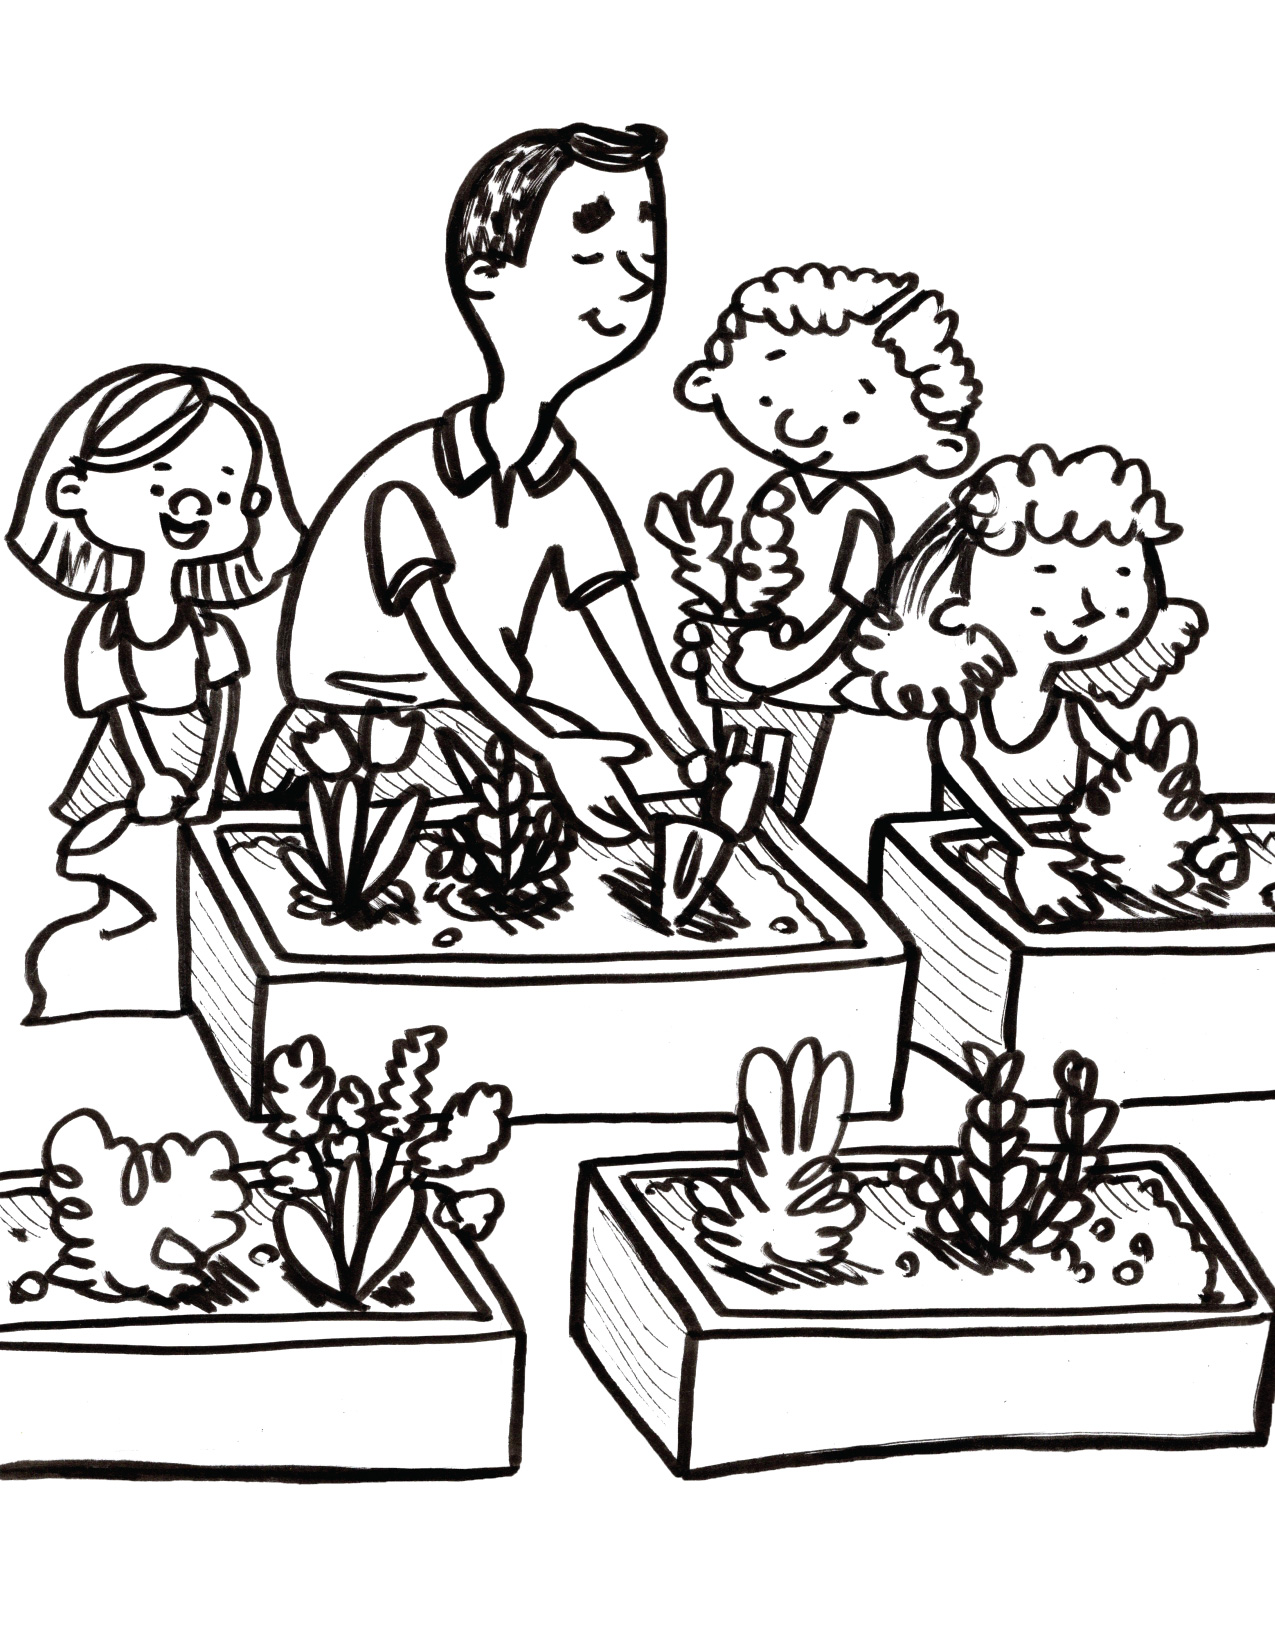 Children learning coloring page